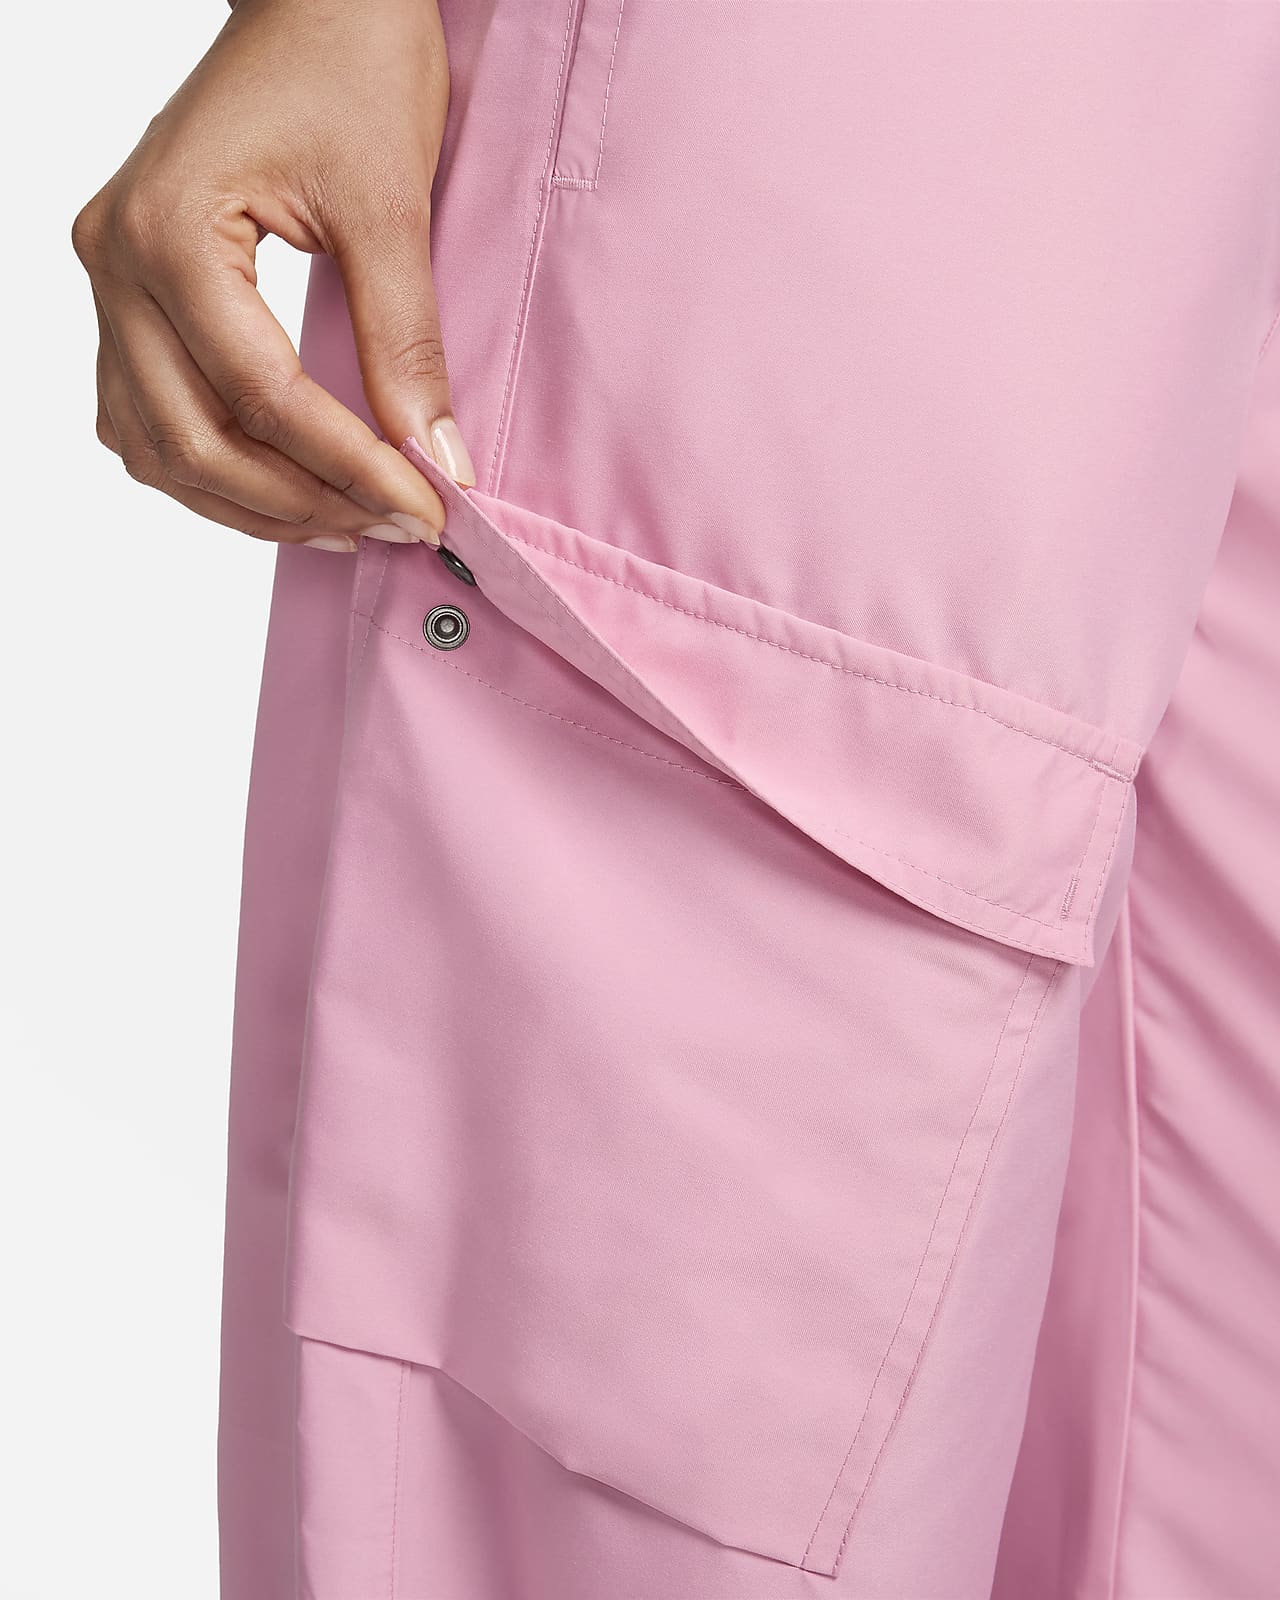 https://static.nike.com/a/images/t_PDP_1280_v1/f_auto,q_auto:eco/859badad-2664-42b1-a86a-a103692ce8ad/sportswear-woven-cargo-trousers-VKg9JZ.png